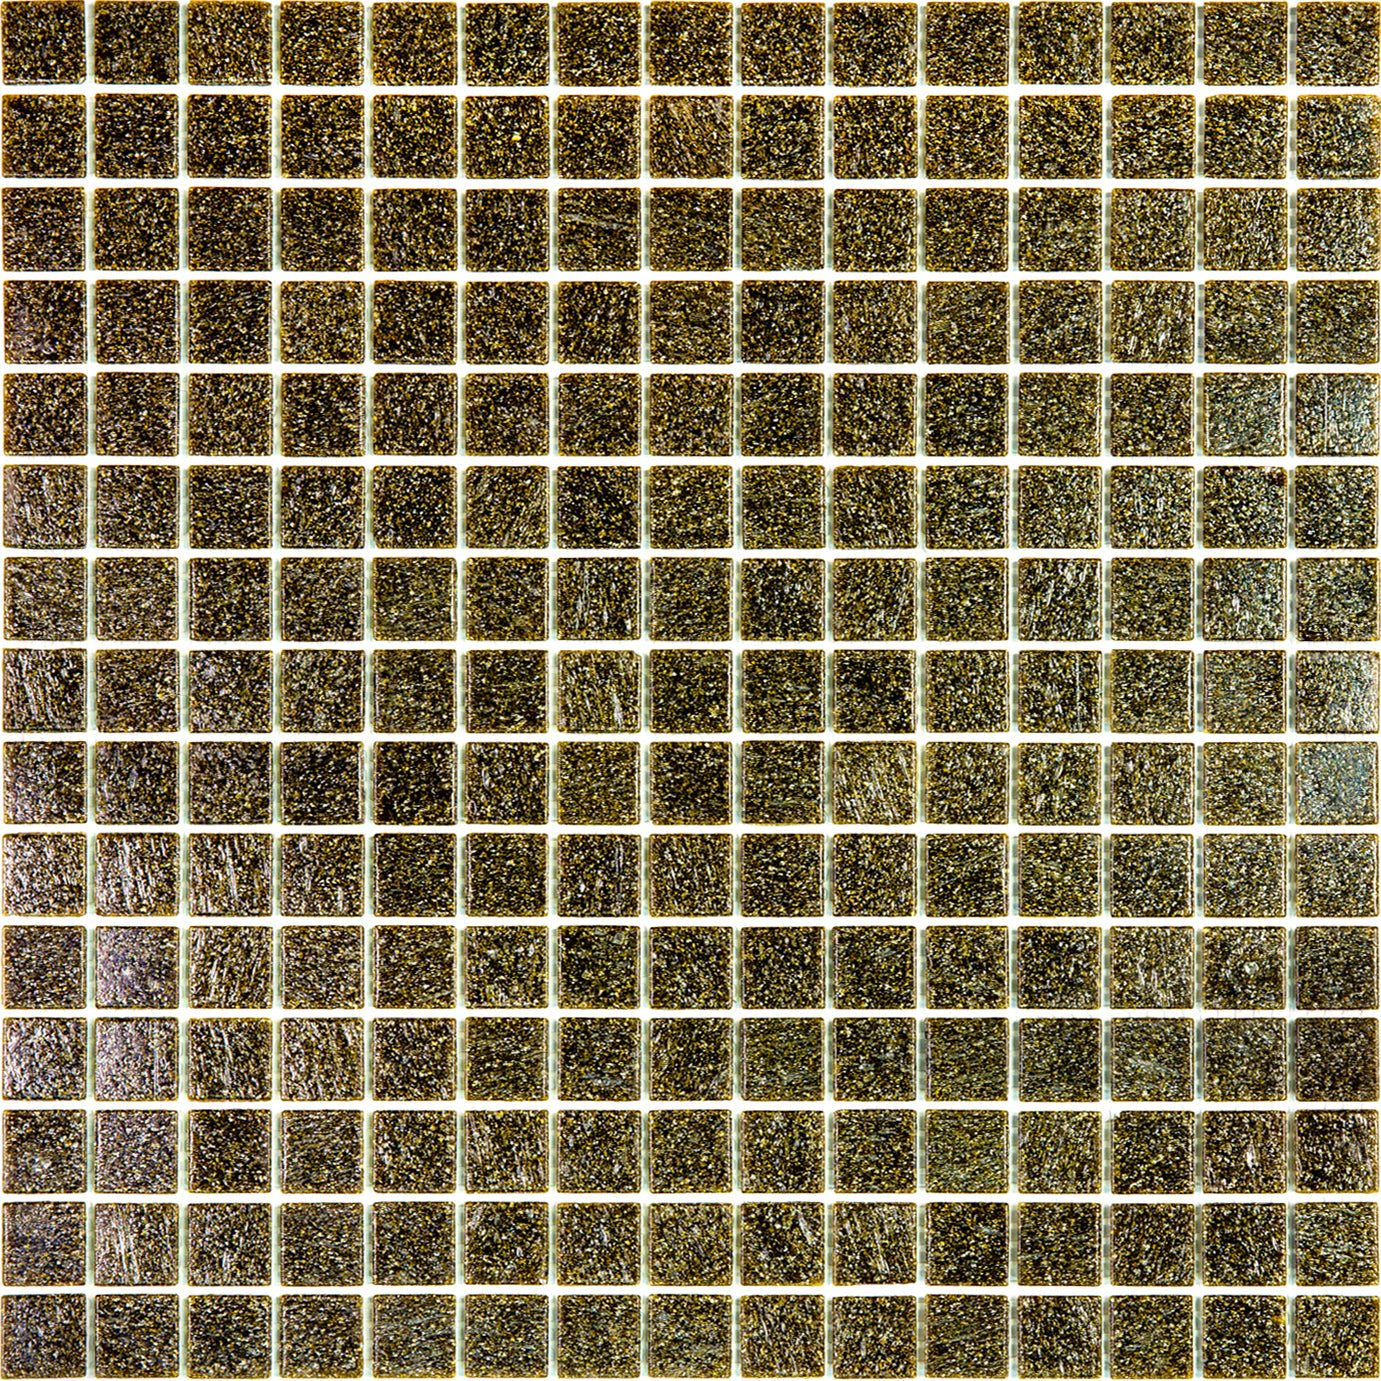 mir alma solid colors 0_8 inch sandy se43 wall and floor mosaic distributed by surface group natural materials